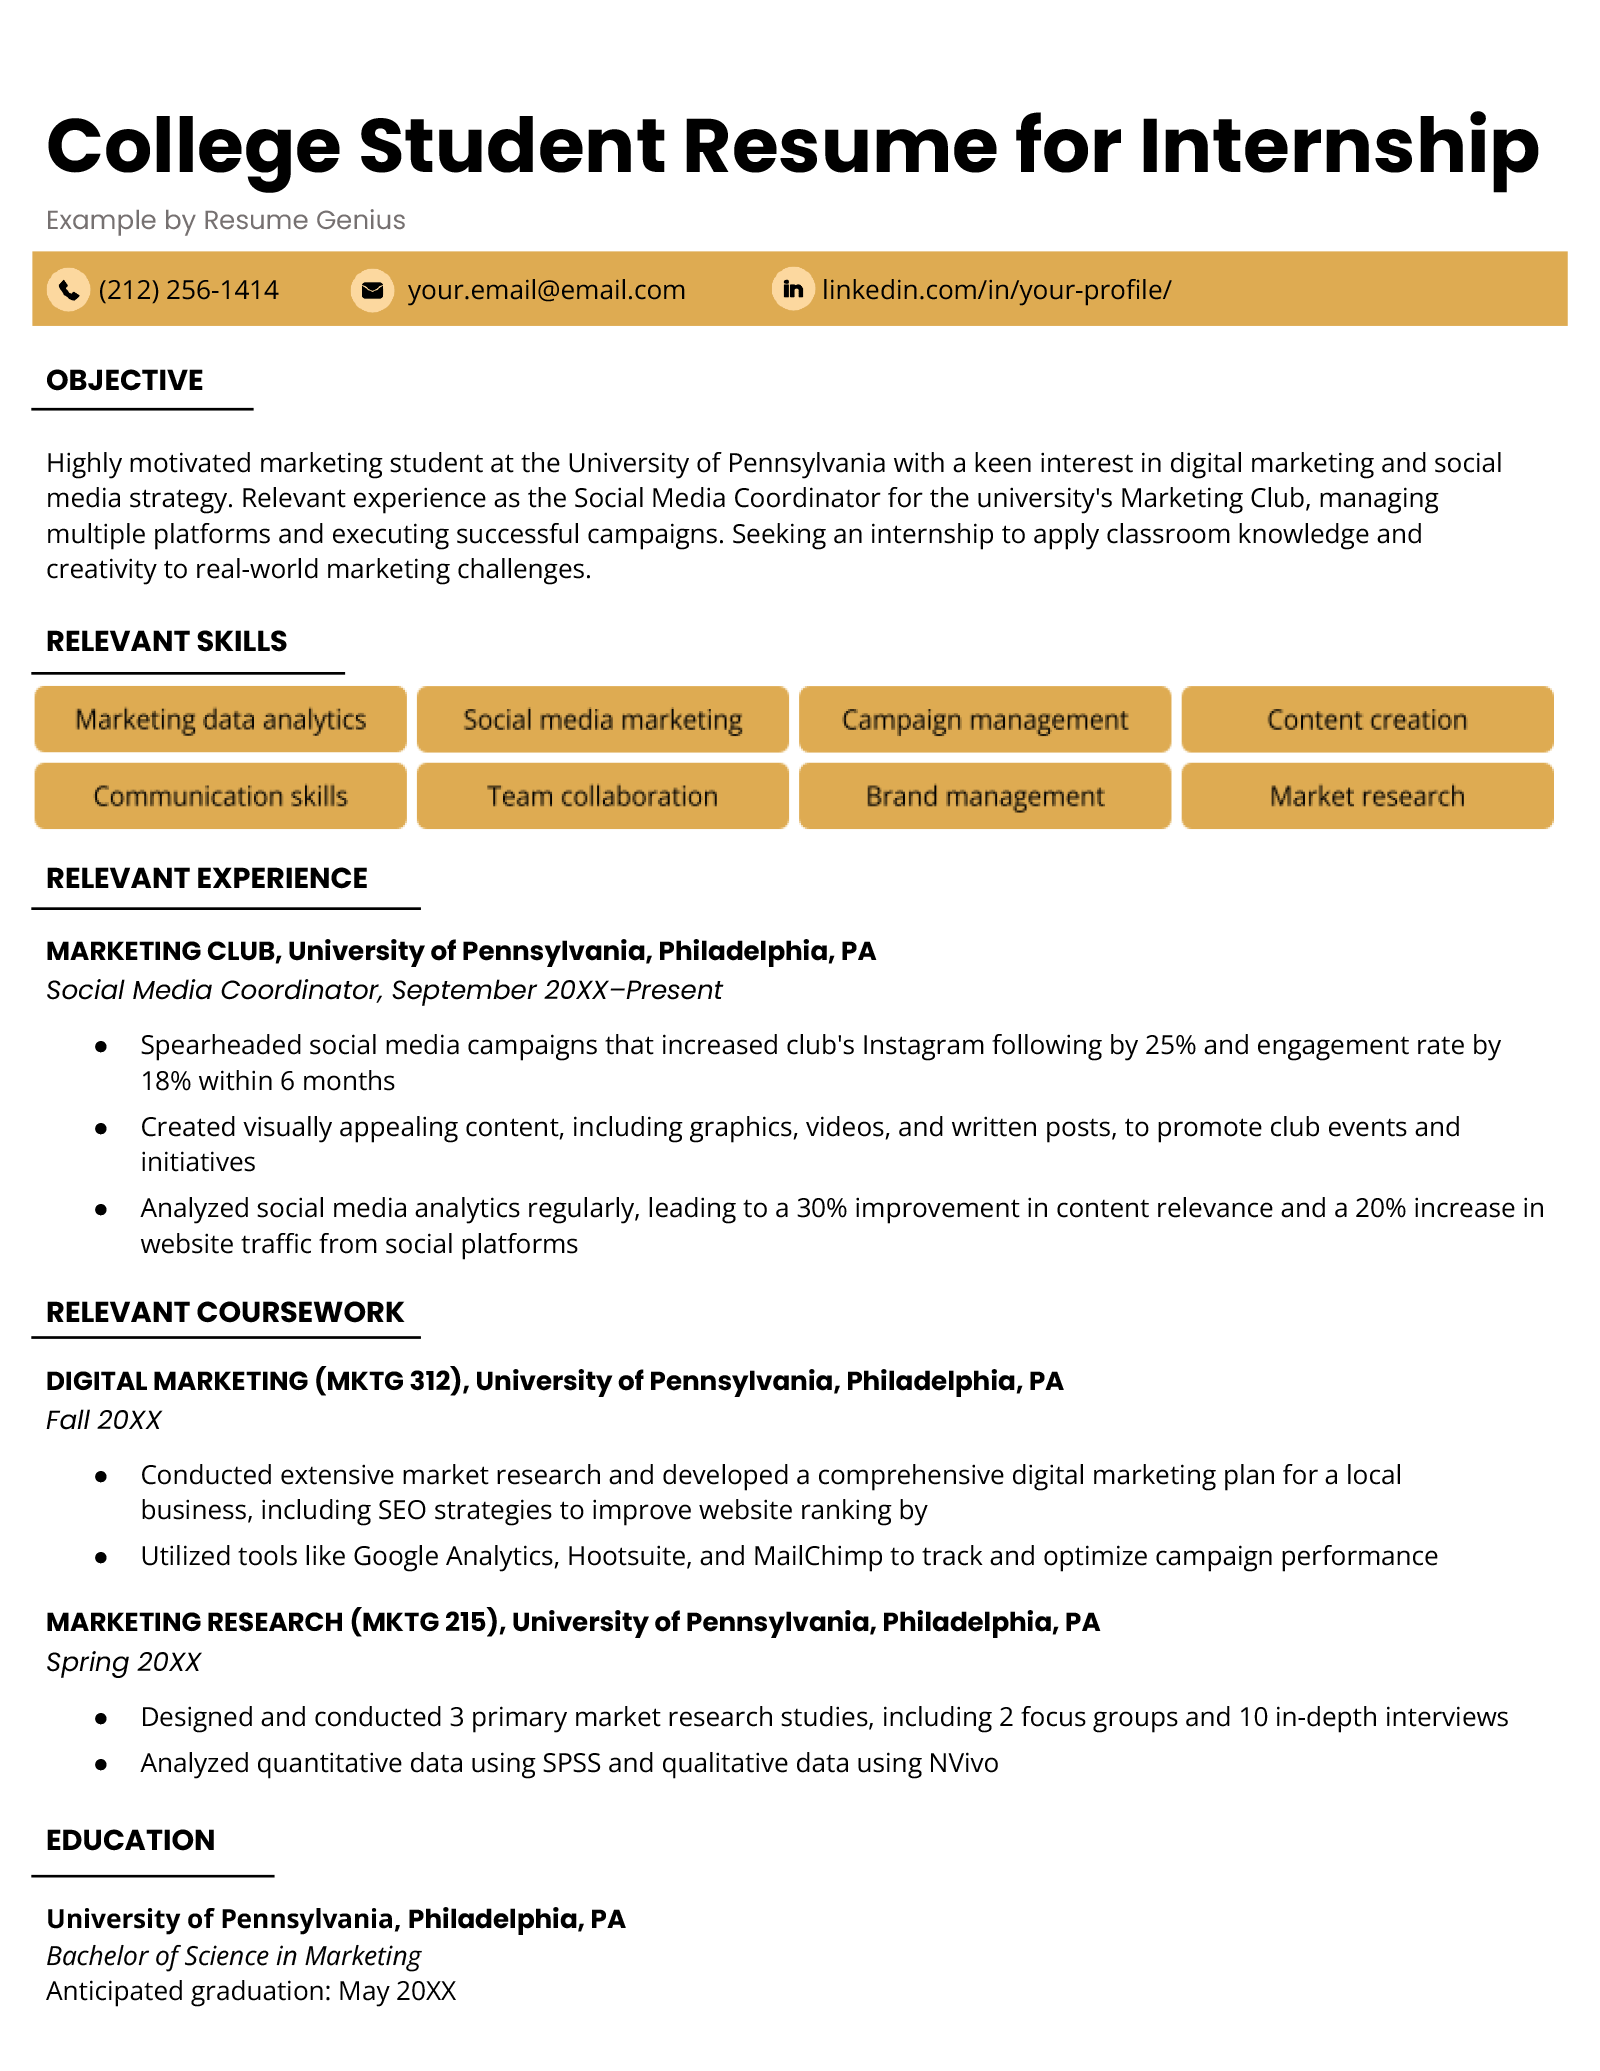 An example resume for a college student applying for an internship. 